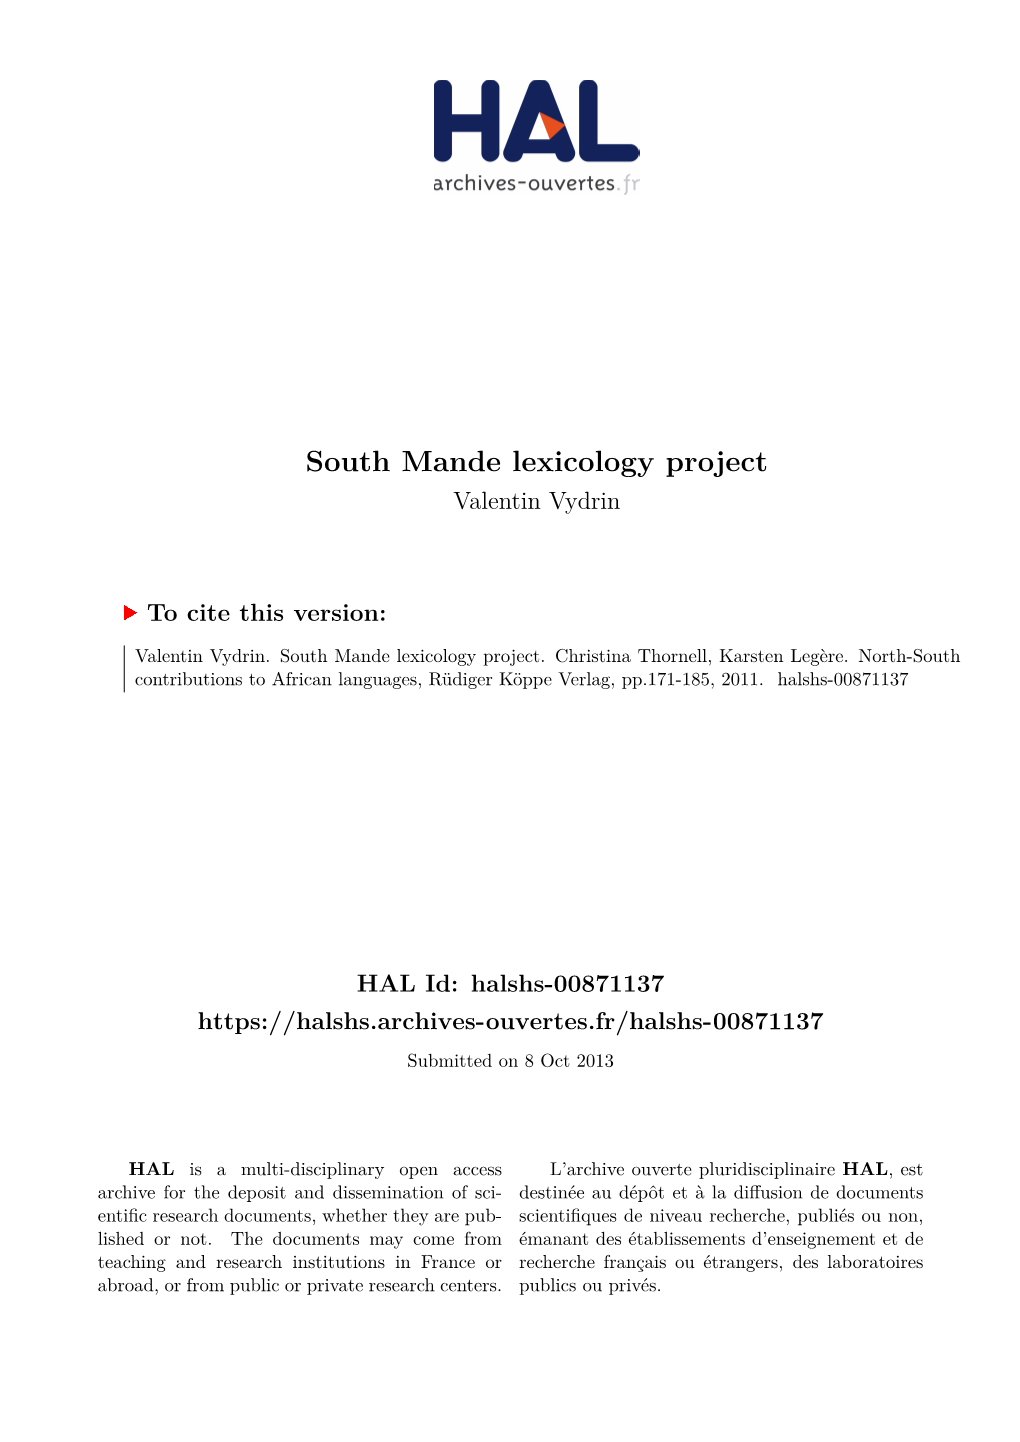 South Mande Lexicology Project Valentin Vydrin